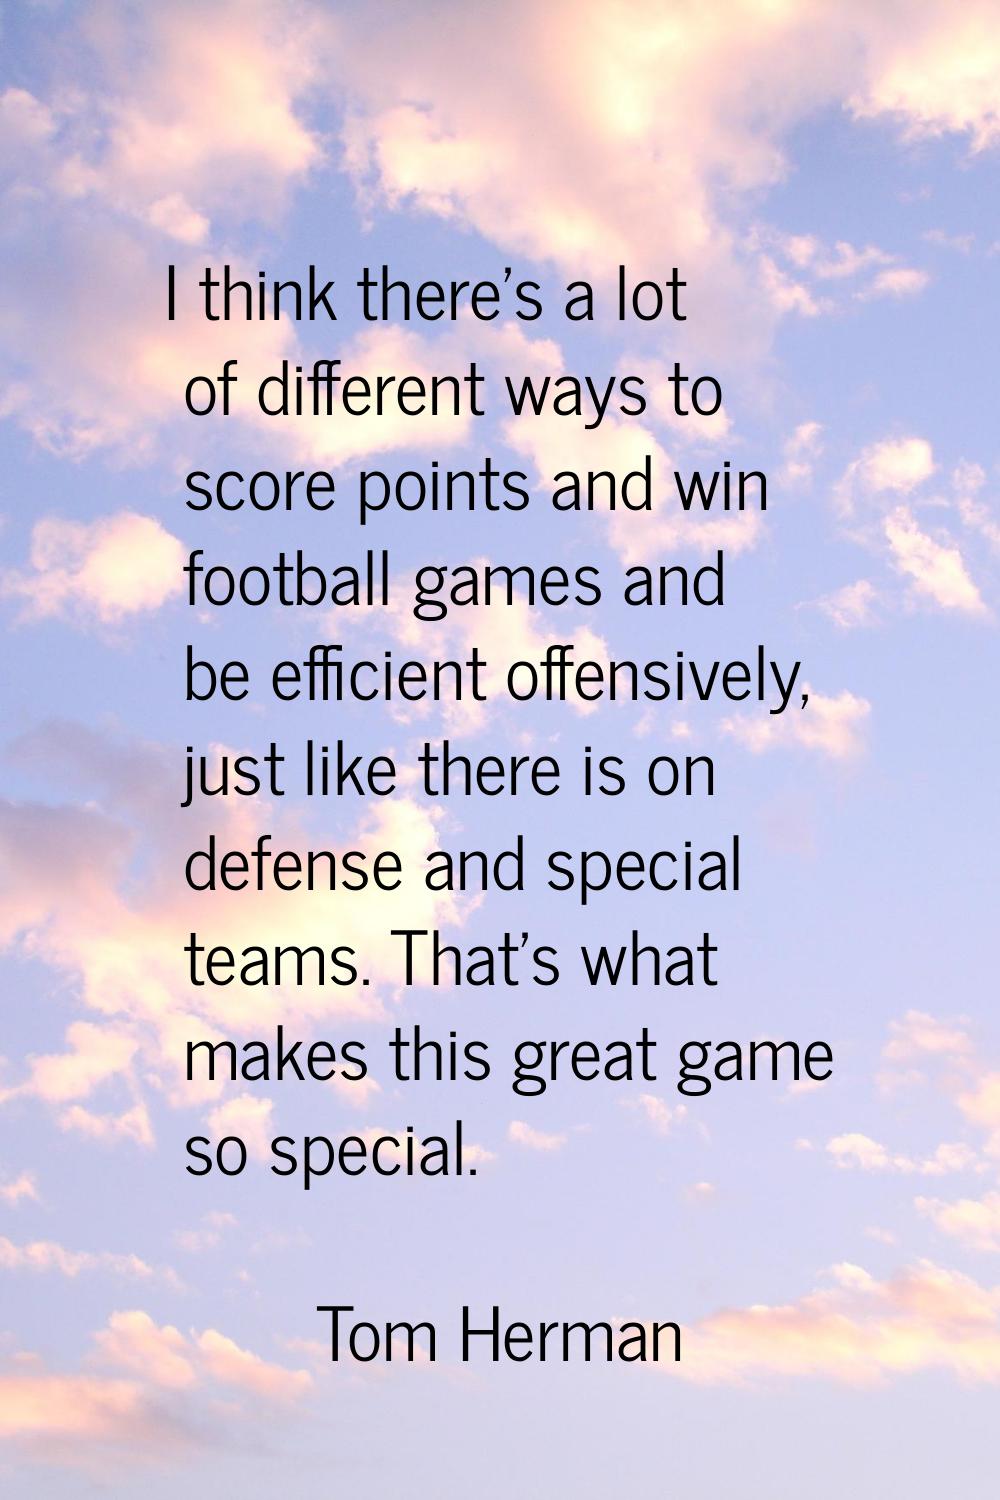 I think there's a lot of different ways to score points and win football games and be efficient off